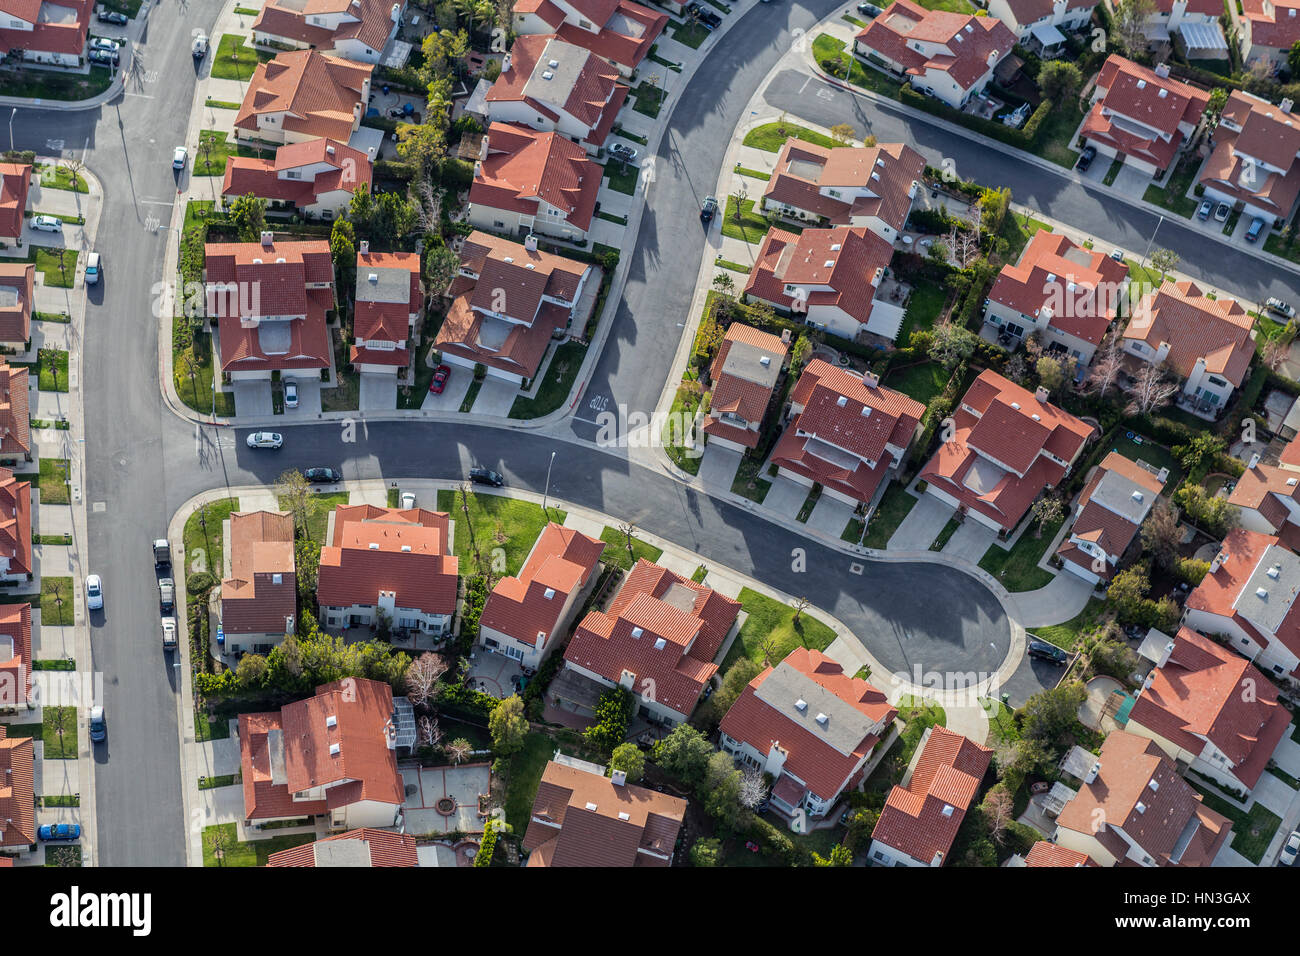 Aerial view of typical suburban cul de sac street in the San Fernando Valley region of Southern California. Stock Photo